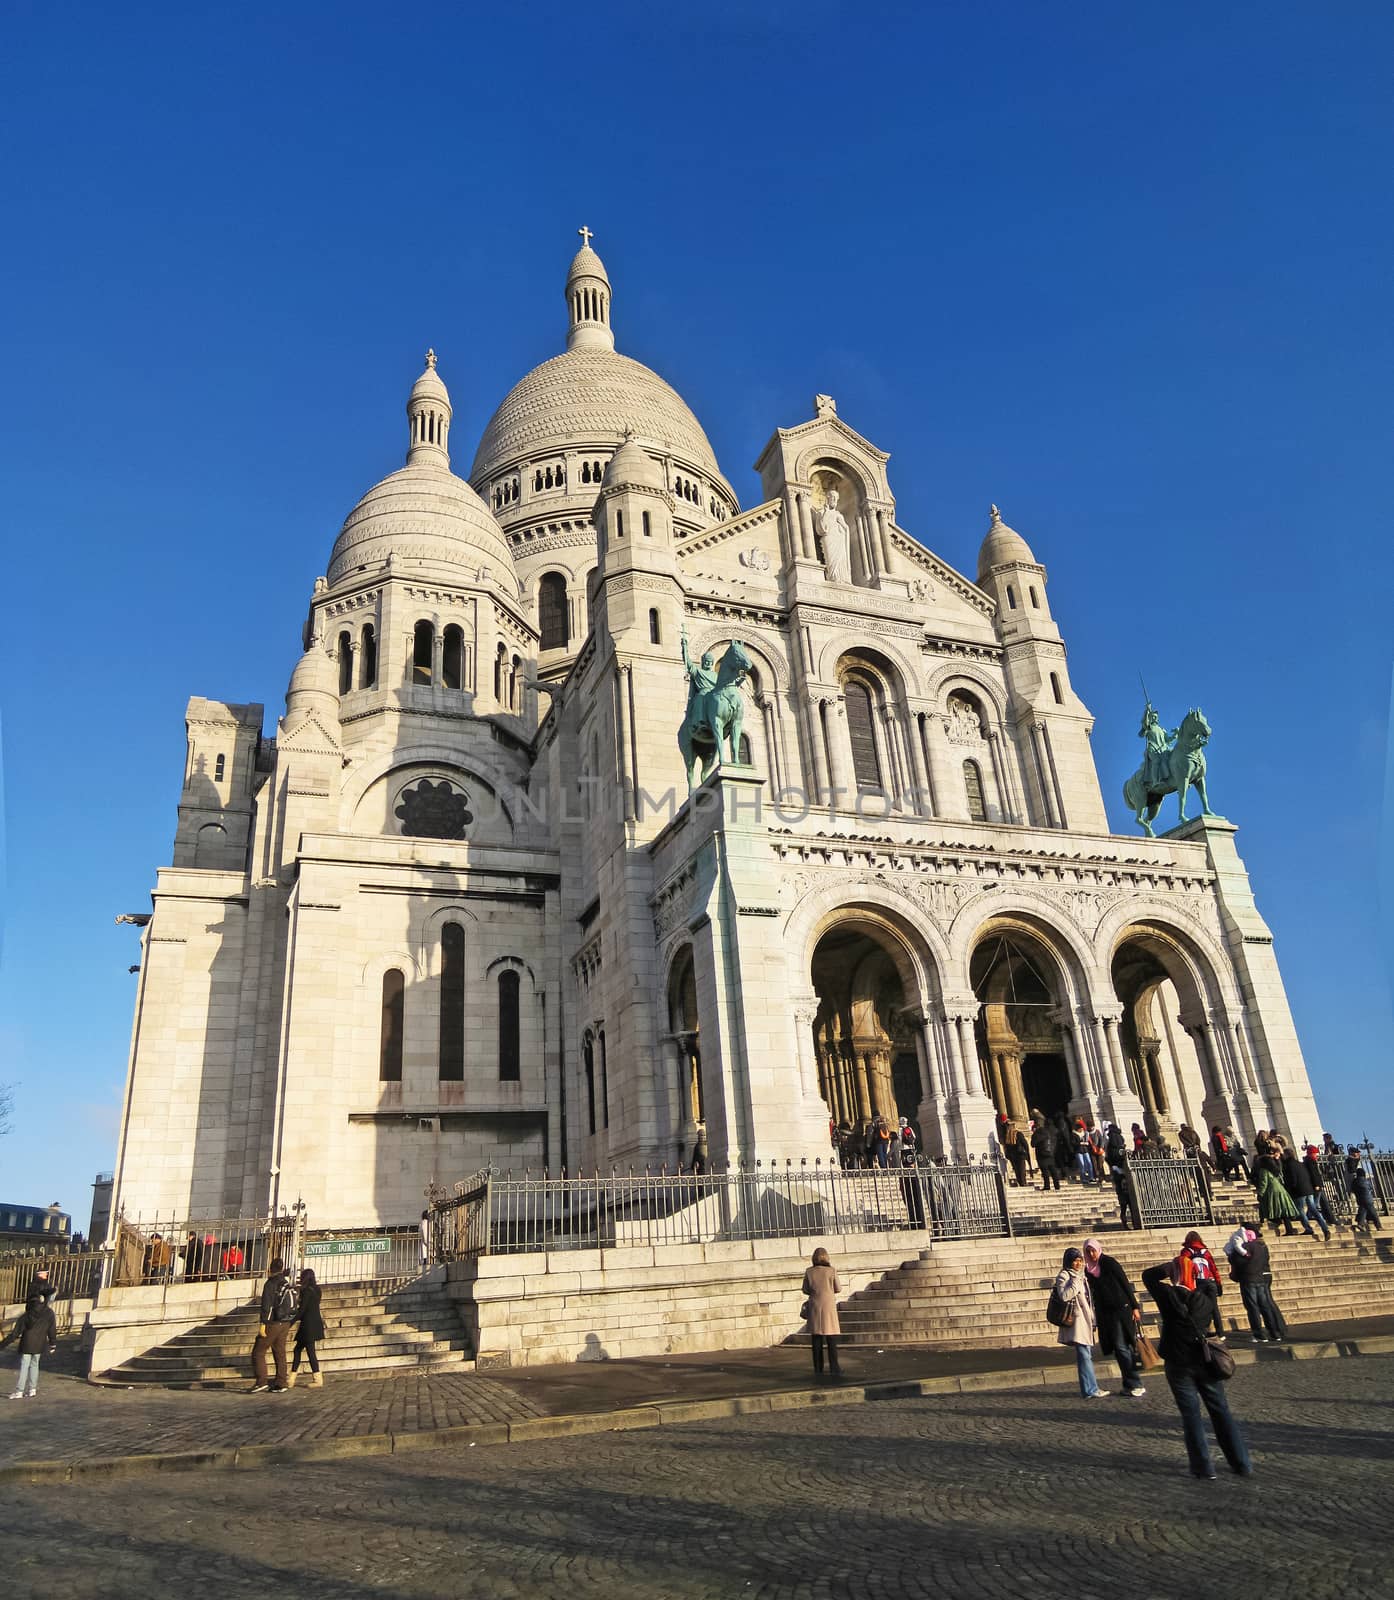 PARIS, FRANCE - December 26: Basilica of Sacre Coeur on December 26, 2008. In the center it is located the Bibliotheque publique d'information, and Musee National d'Art Moderne.